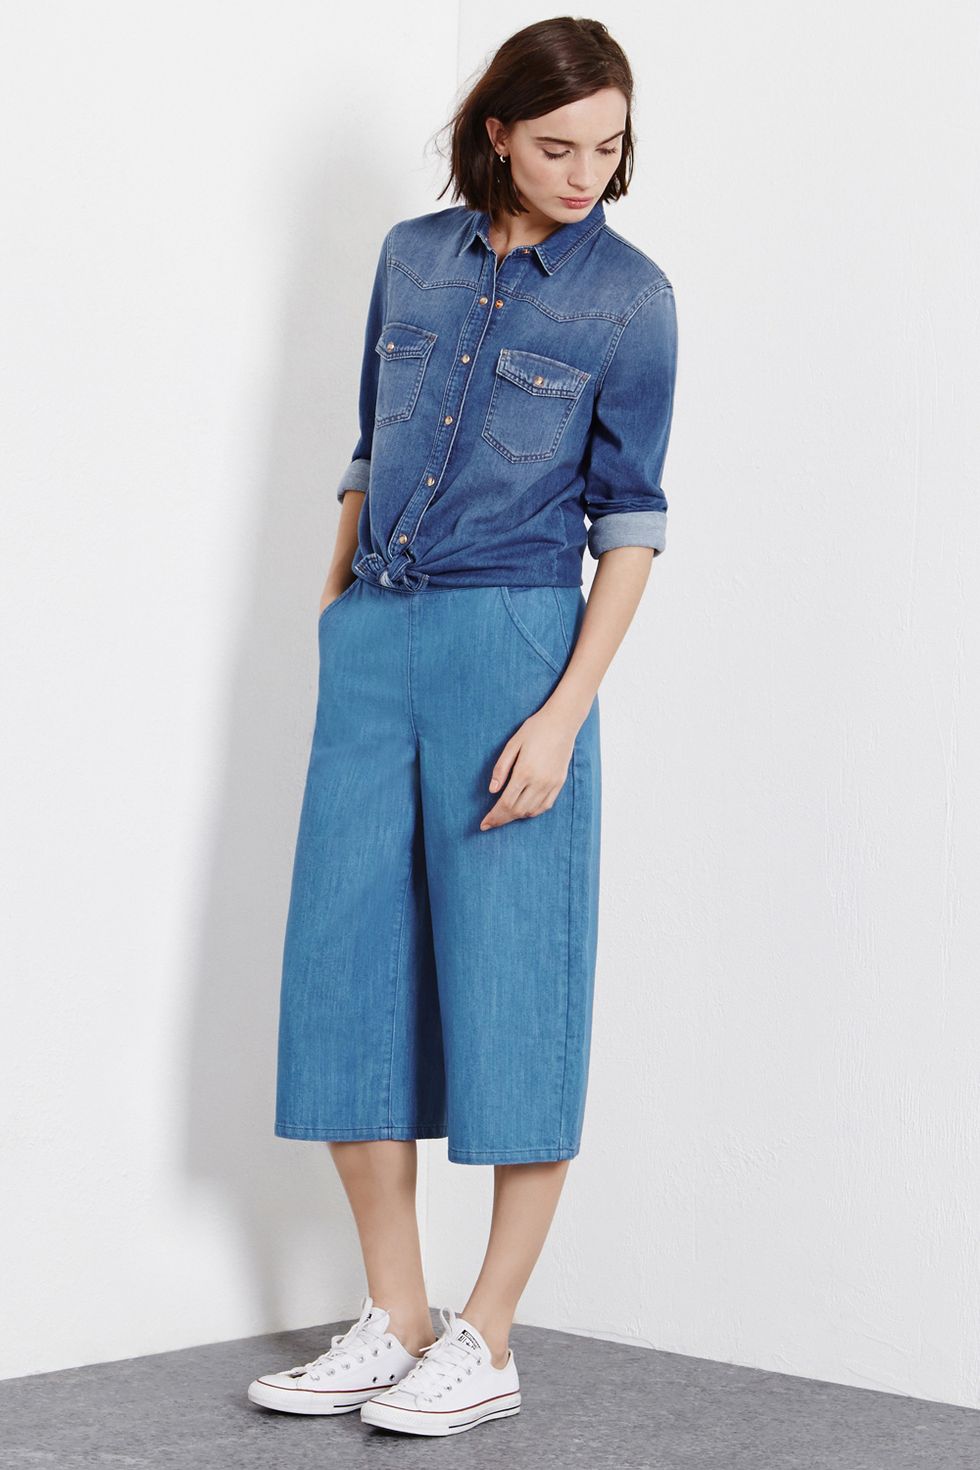 How to wear double denim: culottes and trainers